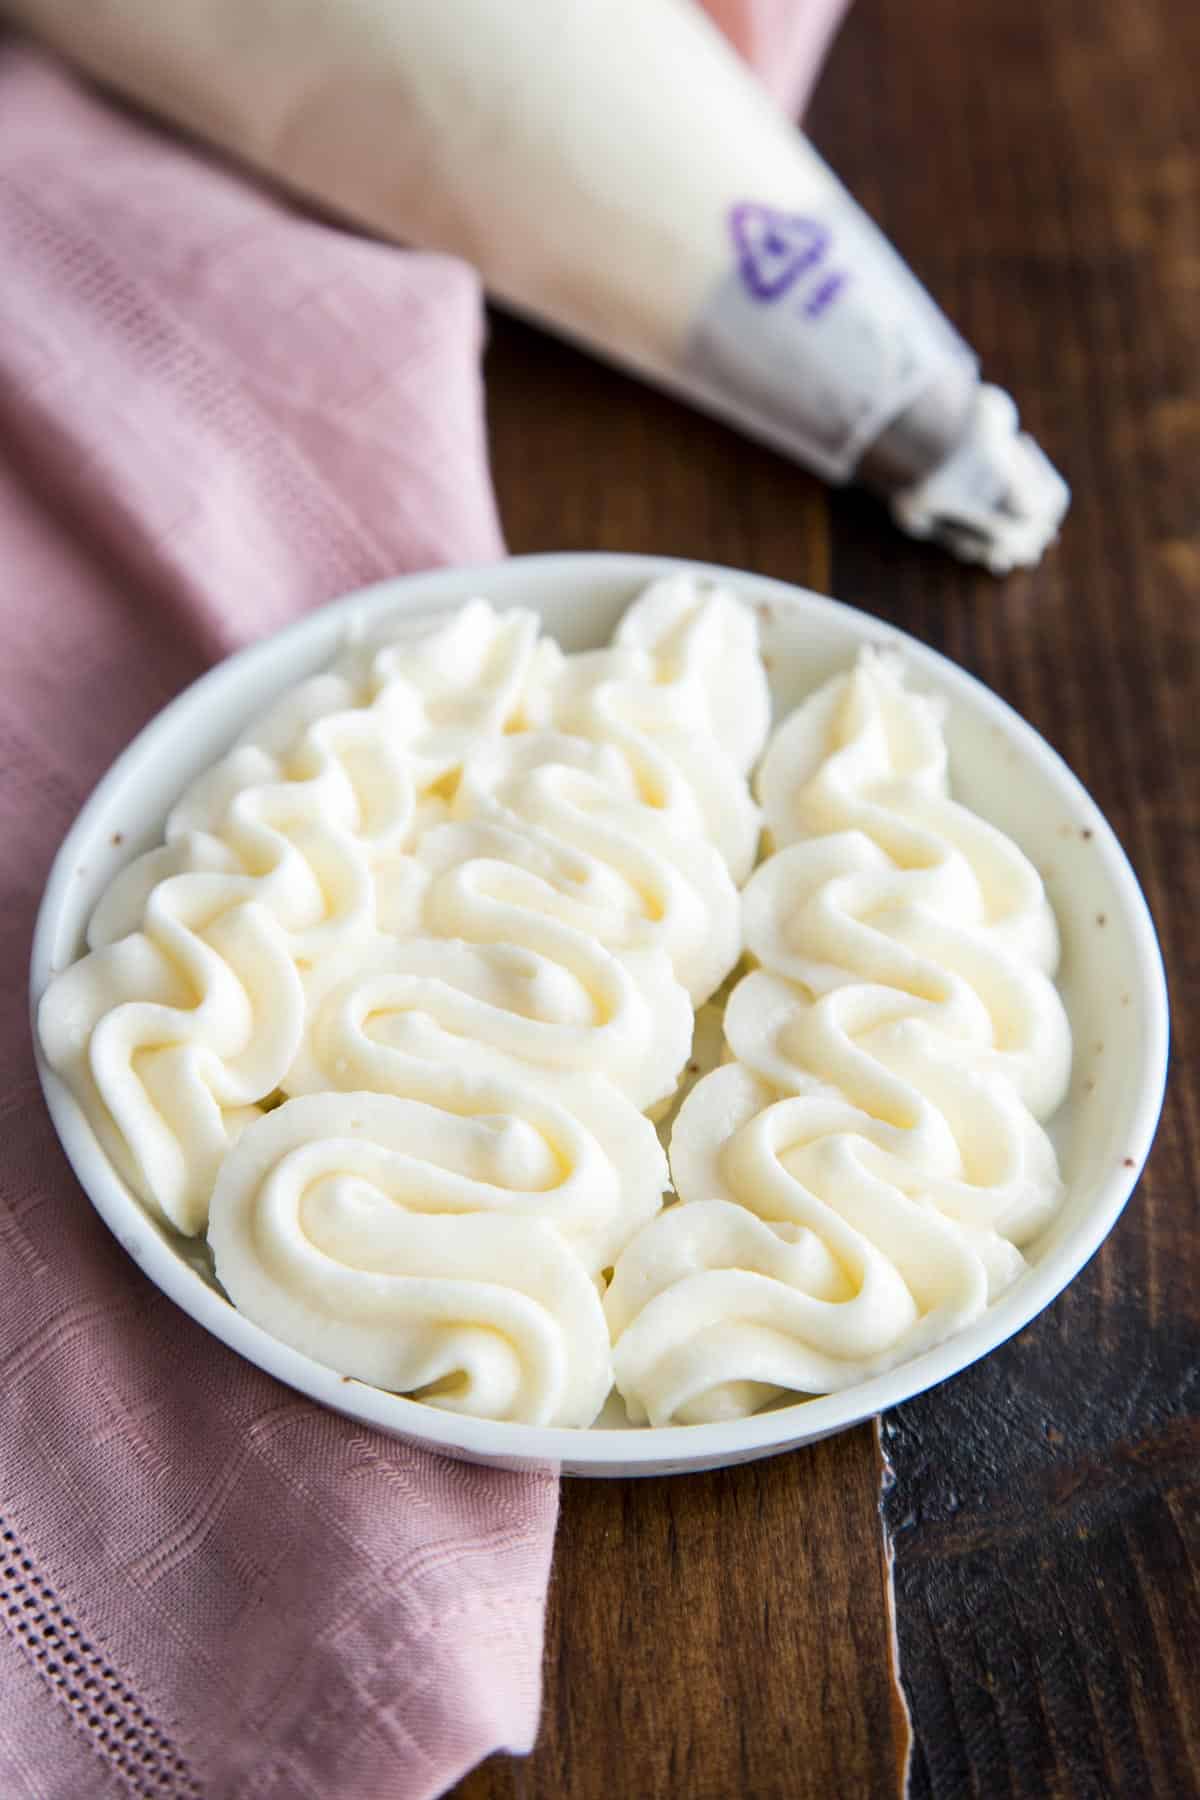 Cream cheese frosting piped on a plate